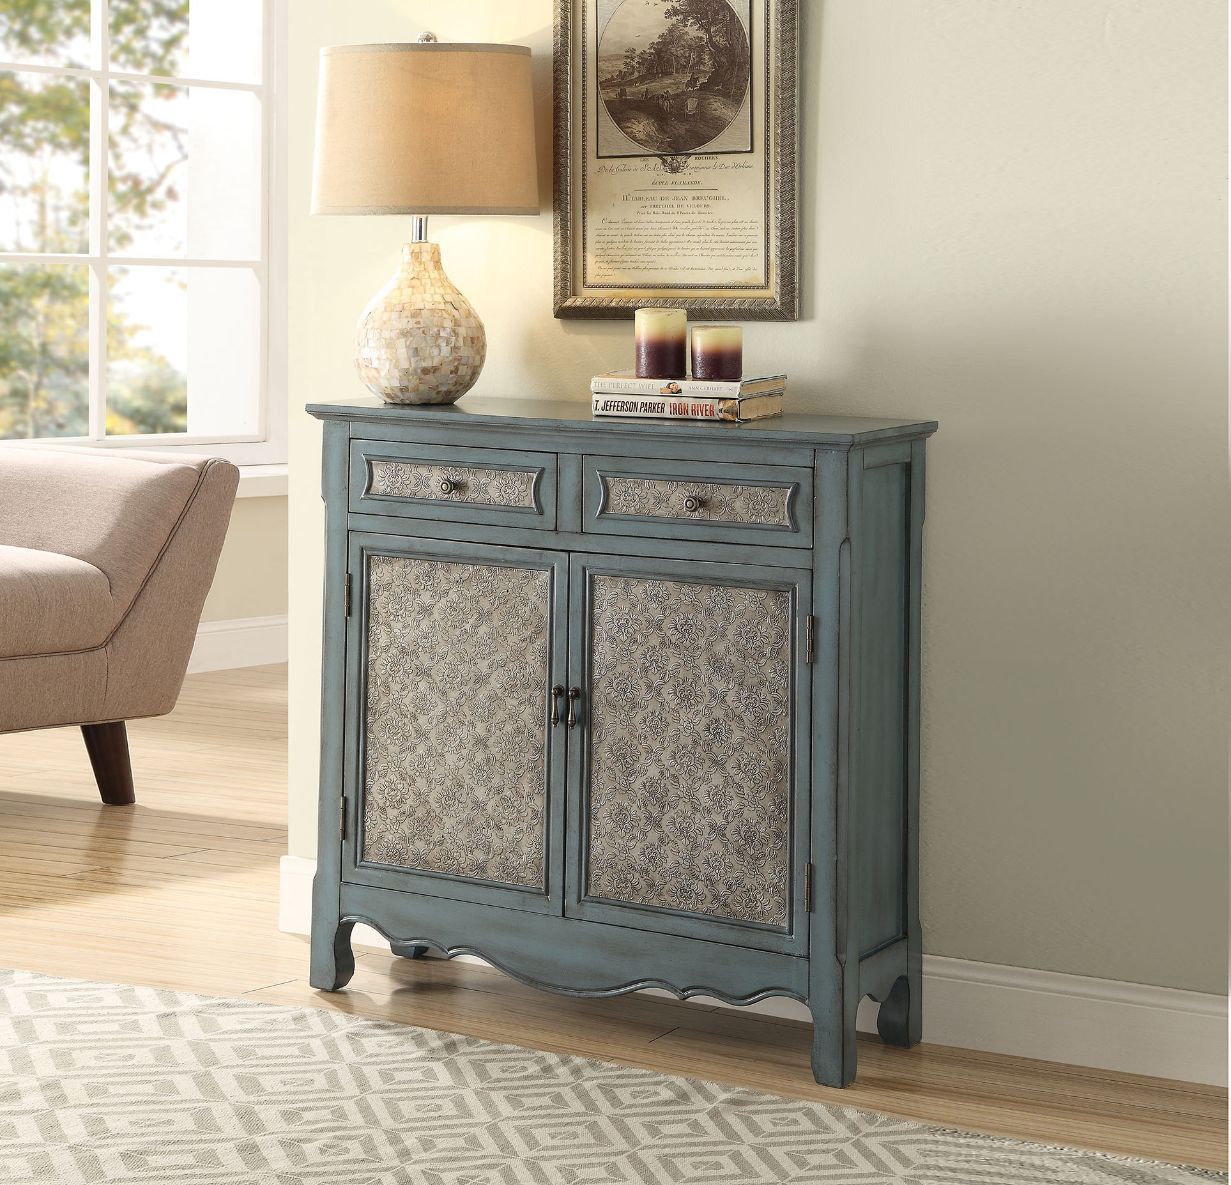 Winchell - Accent Table - Antique Blue - 35"